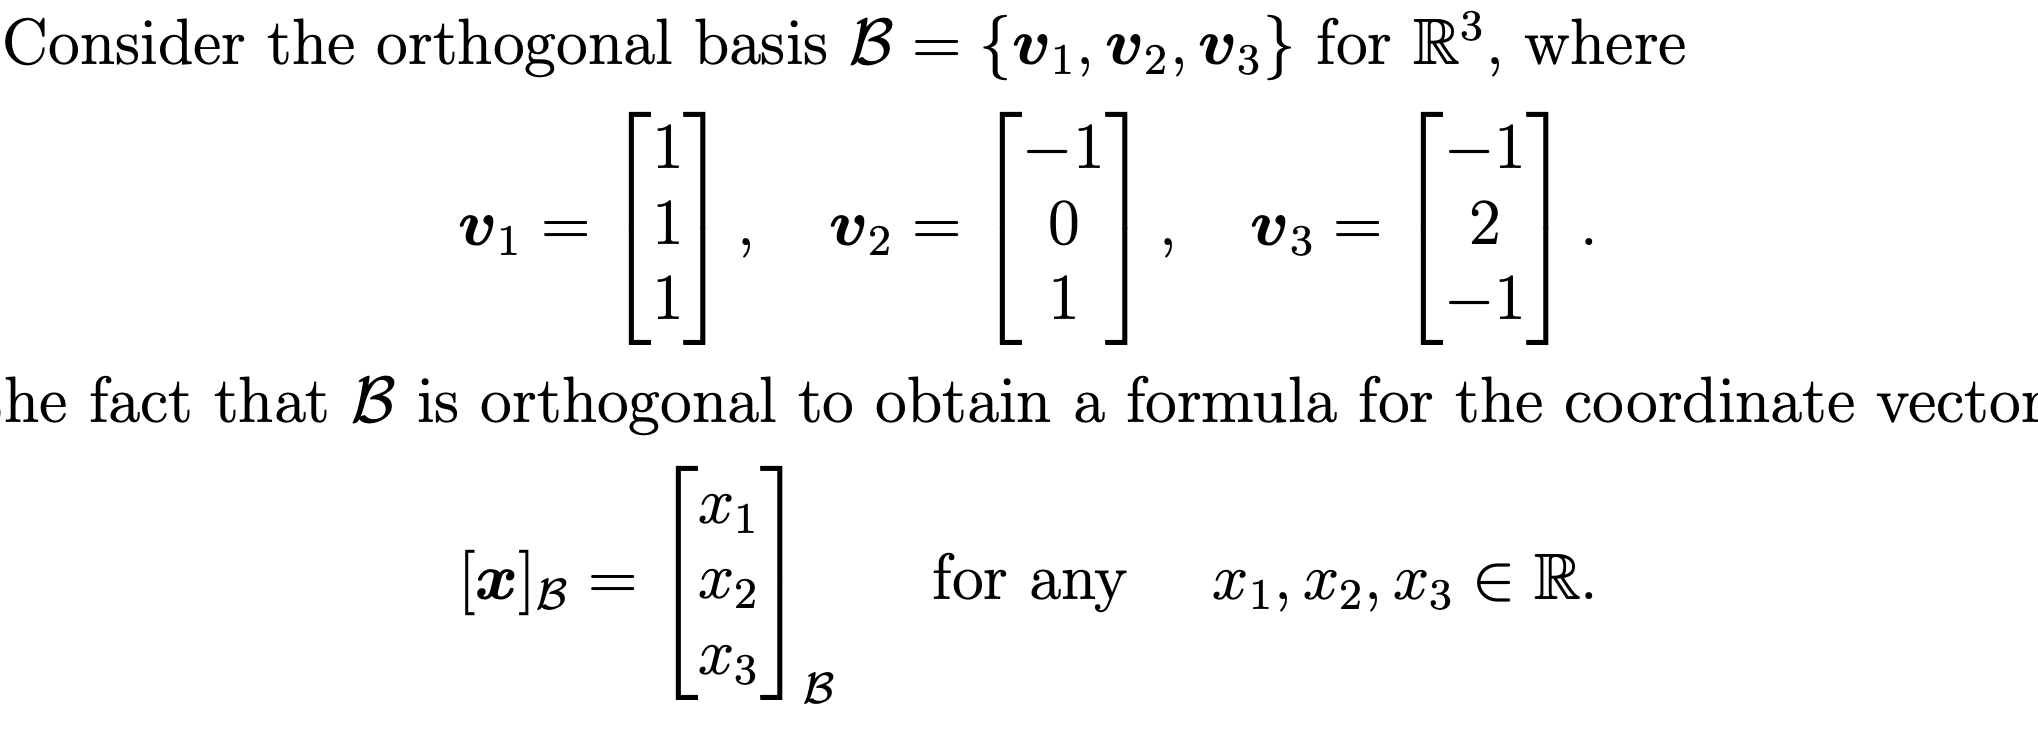 where
Consider the orthogonal basis B = {v1, v2, V3} for R³,
V3
V2
V1
he fact that B is orthogonal to obtain a formula for the coordinate vector
X1
for any
X1, X2, X3 E R.
[x]B
X2
X3
